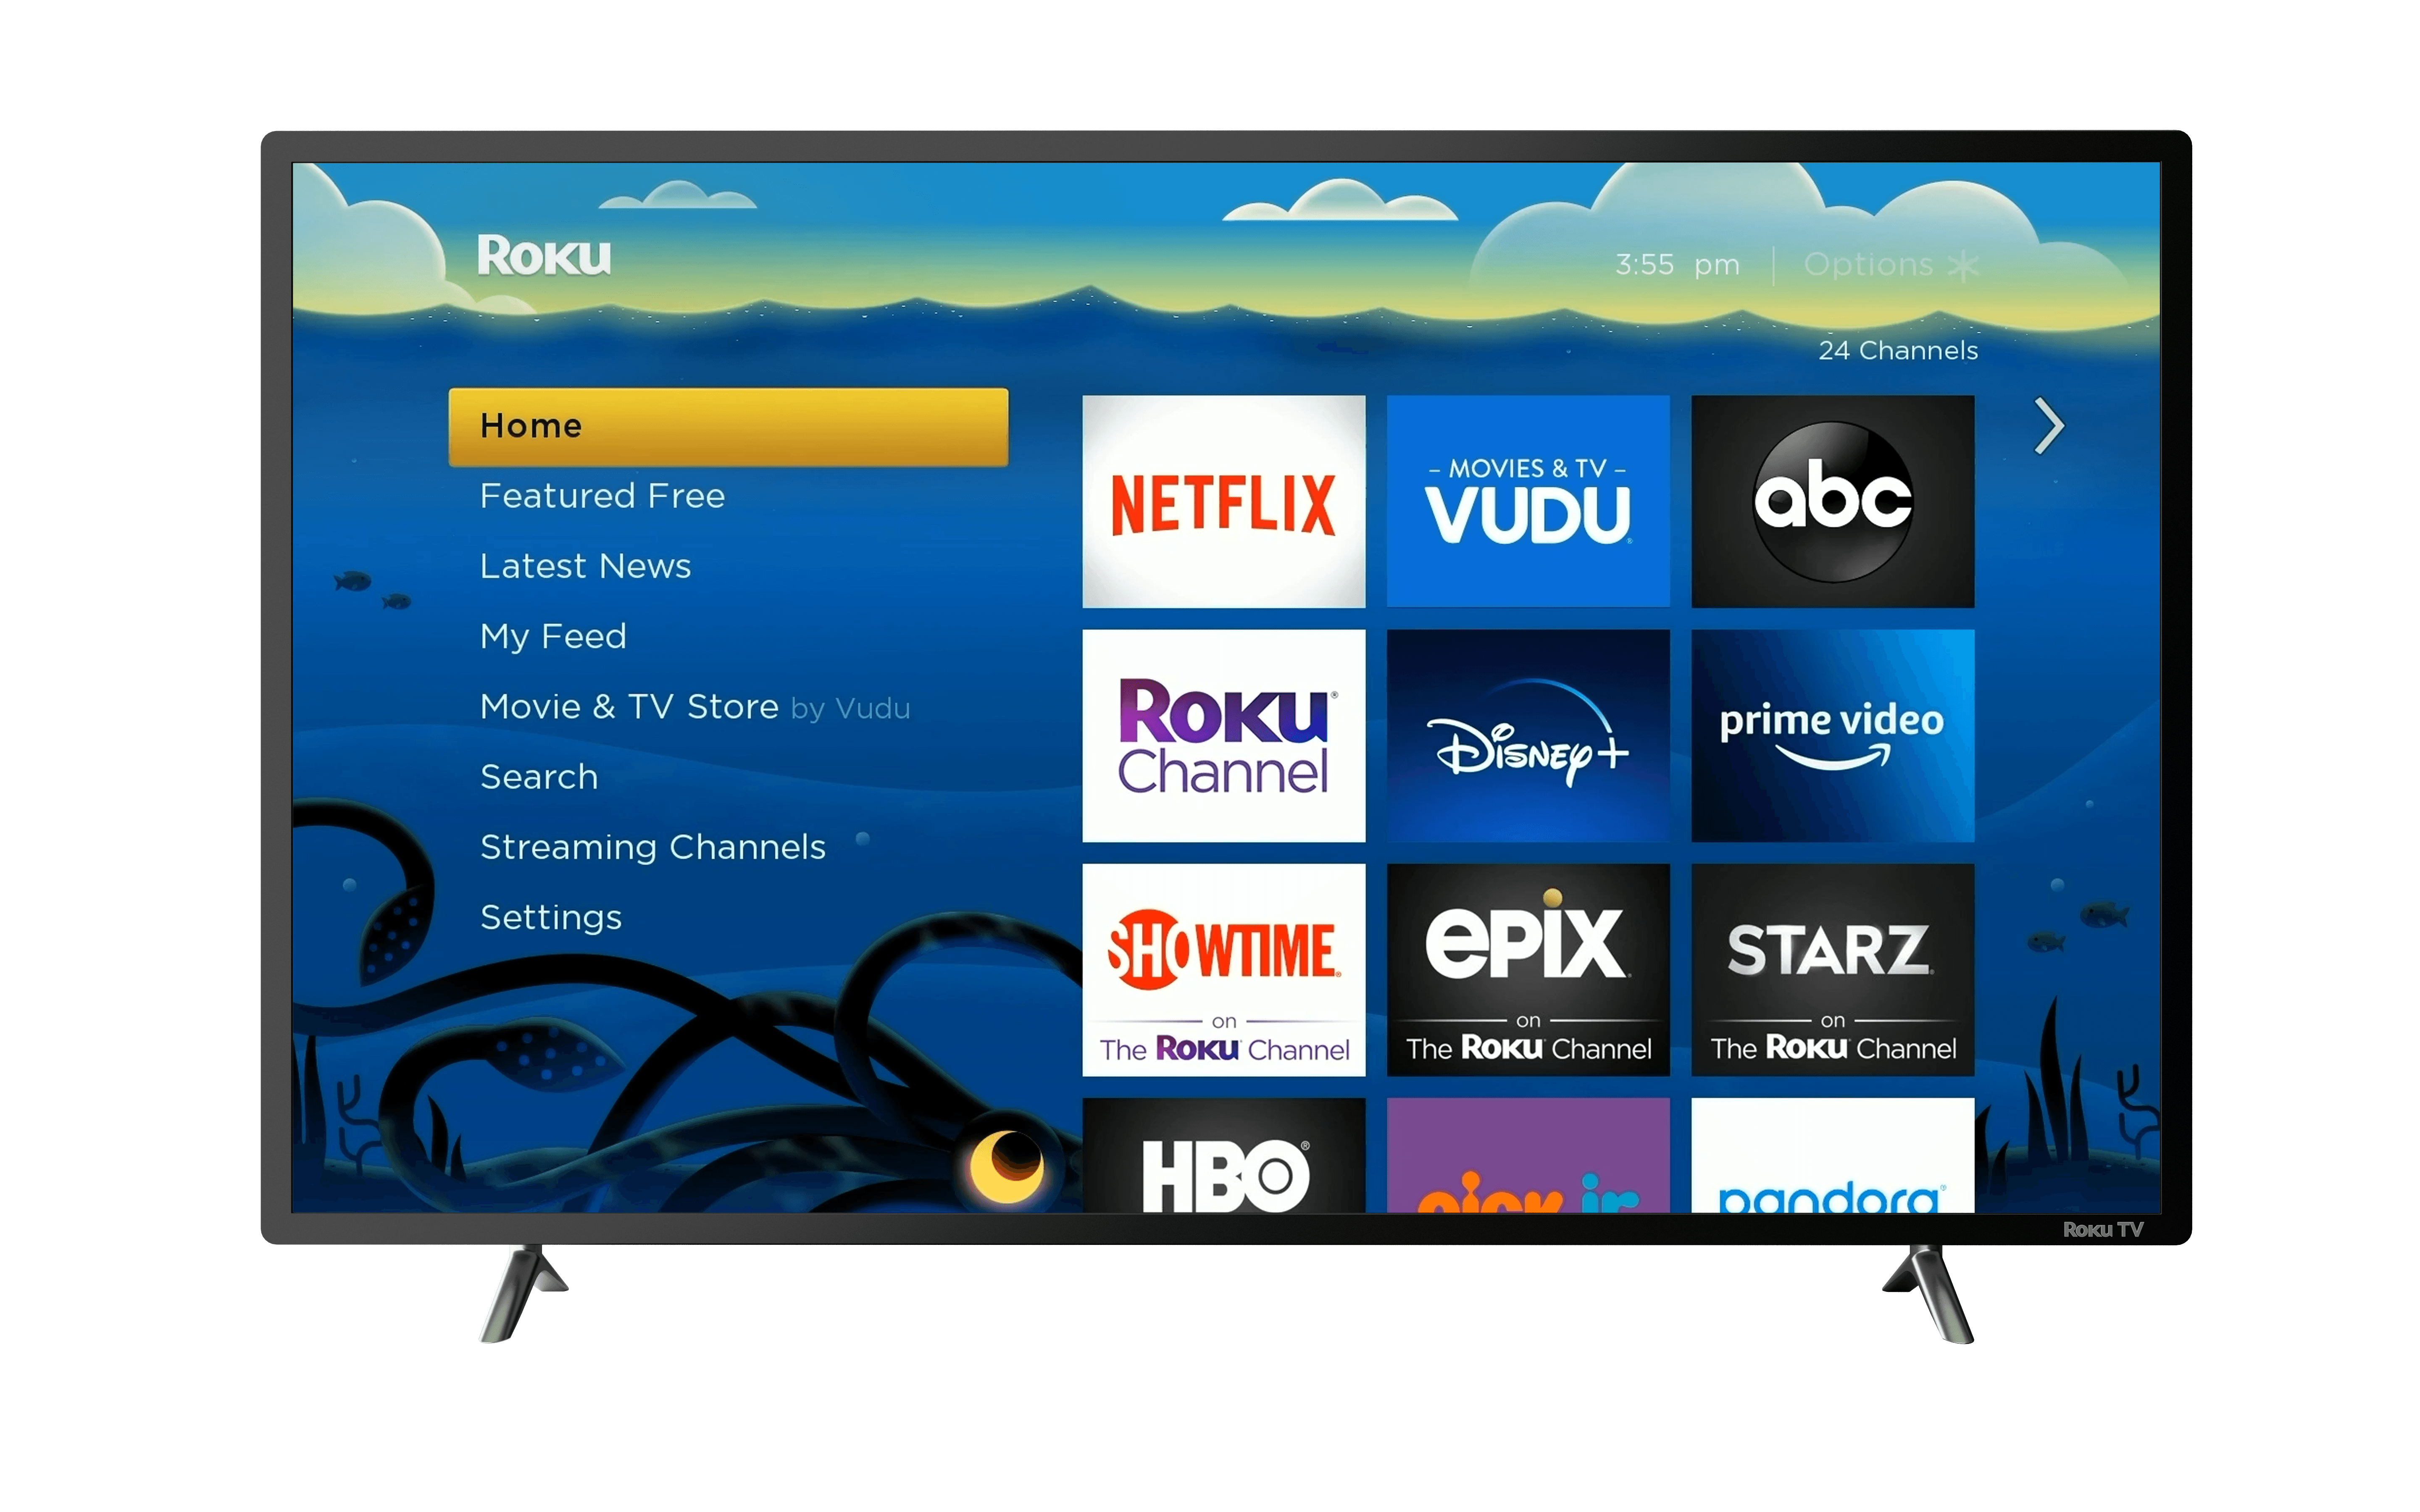 Roku Launches OS 9.4 Update with Improved Live TV Channel Guide, Additional Voice Commands & More